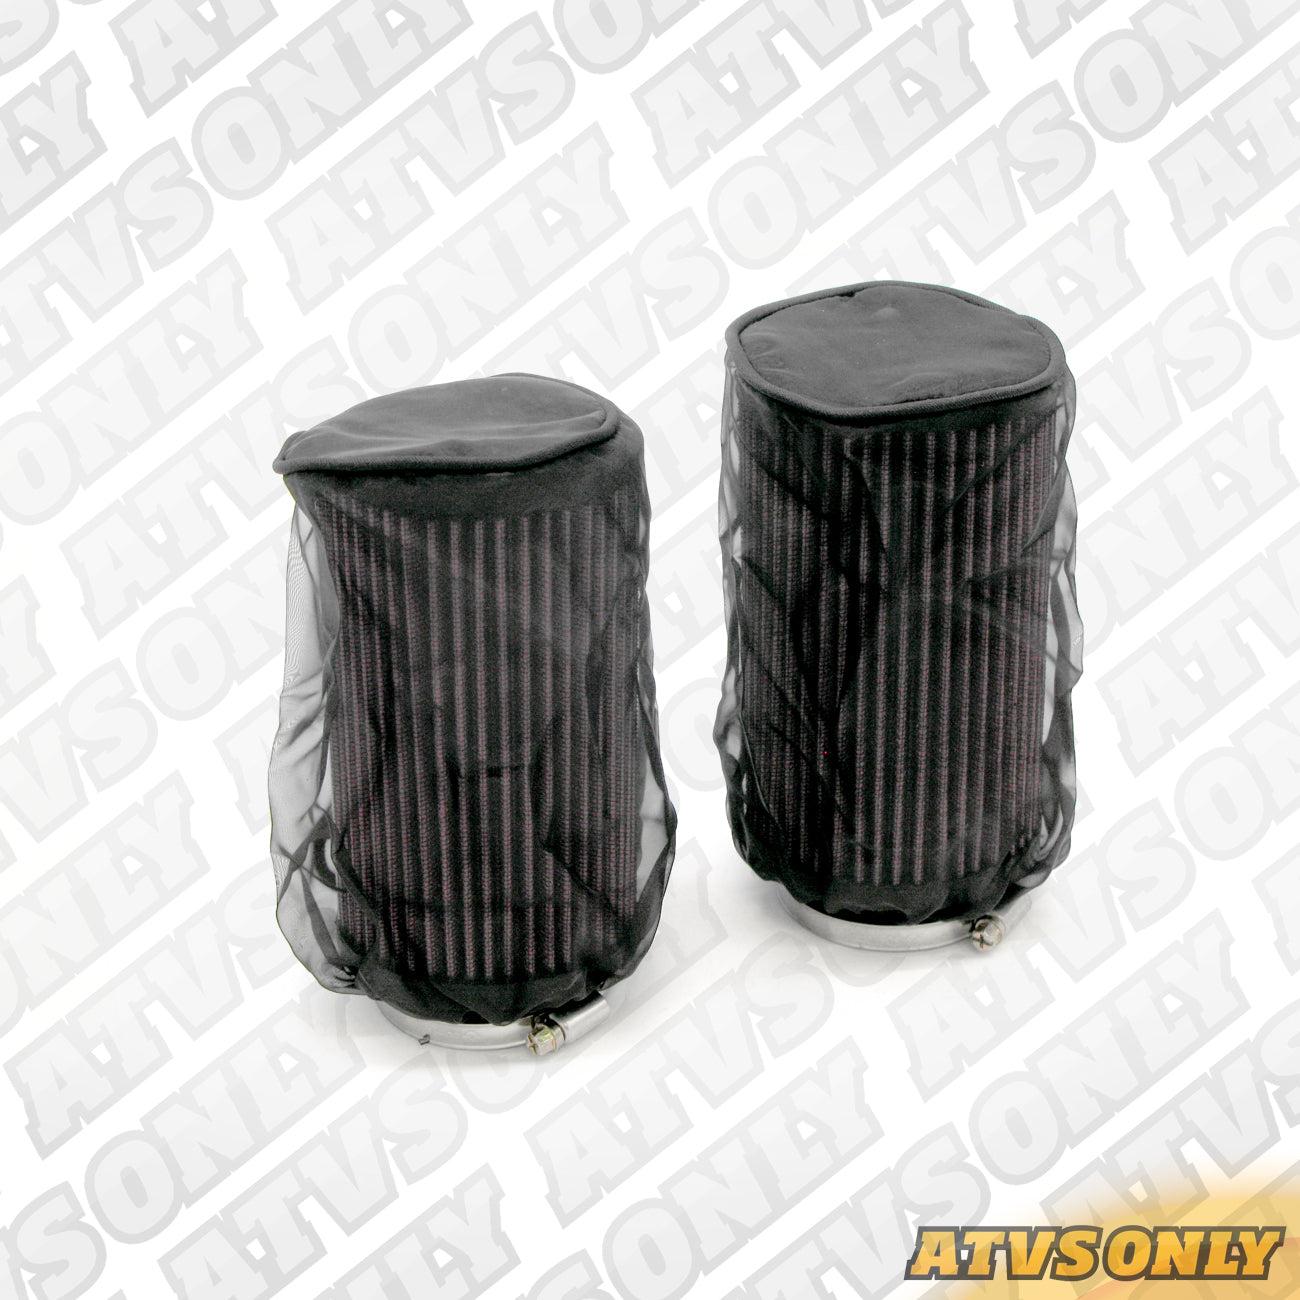 Air Filter with Outerwear for Yamaha Applications